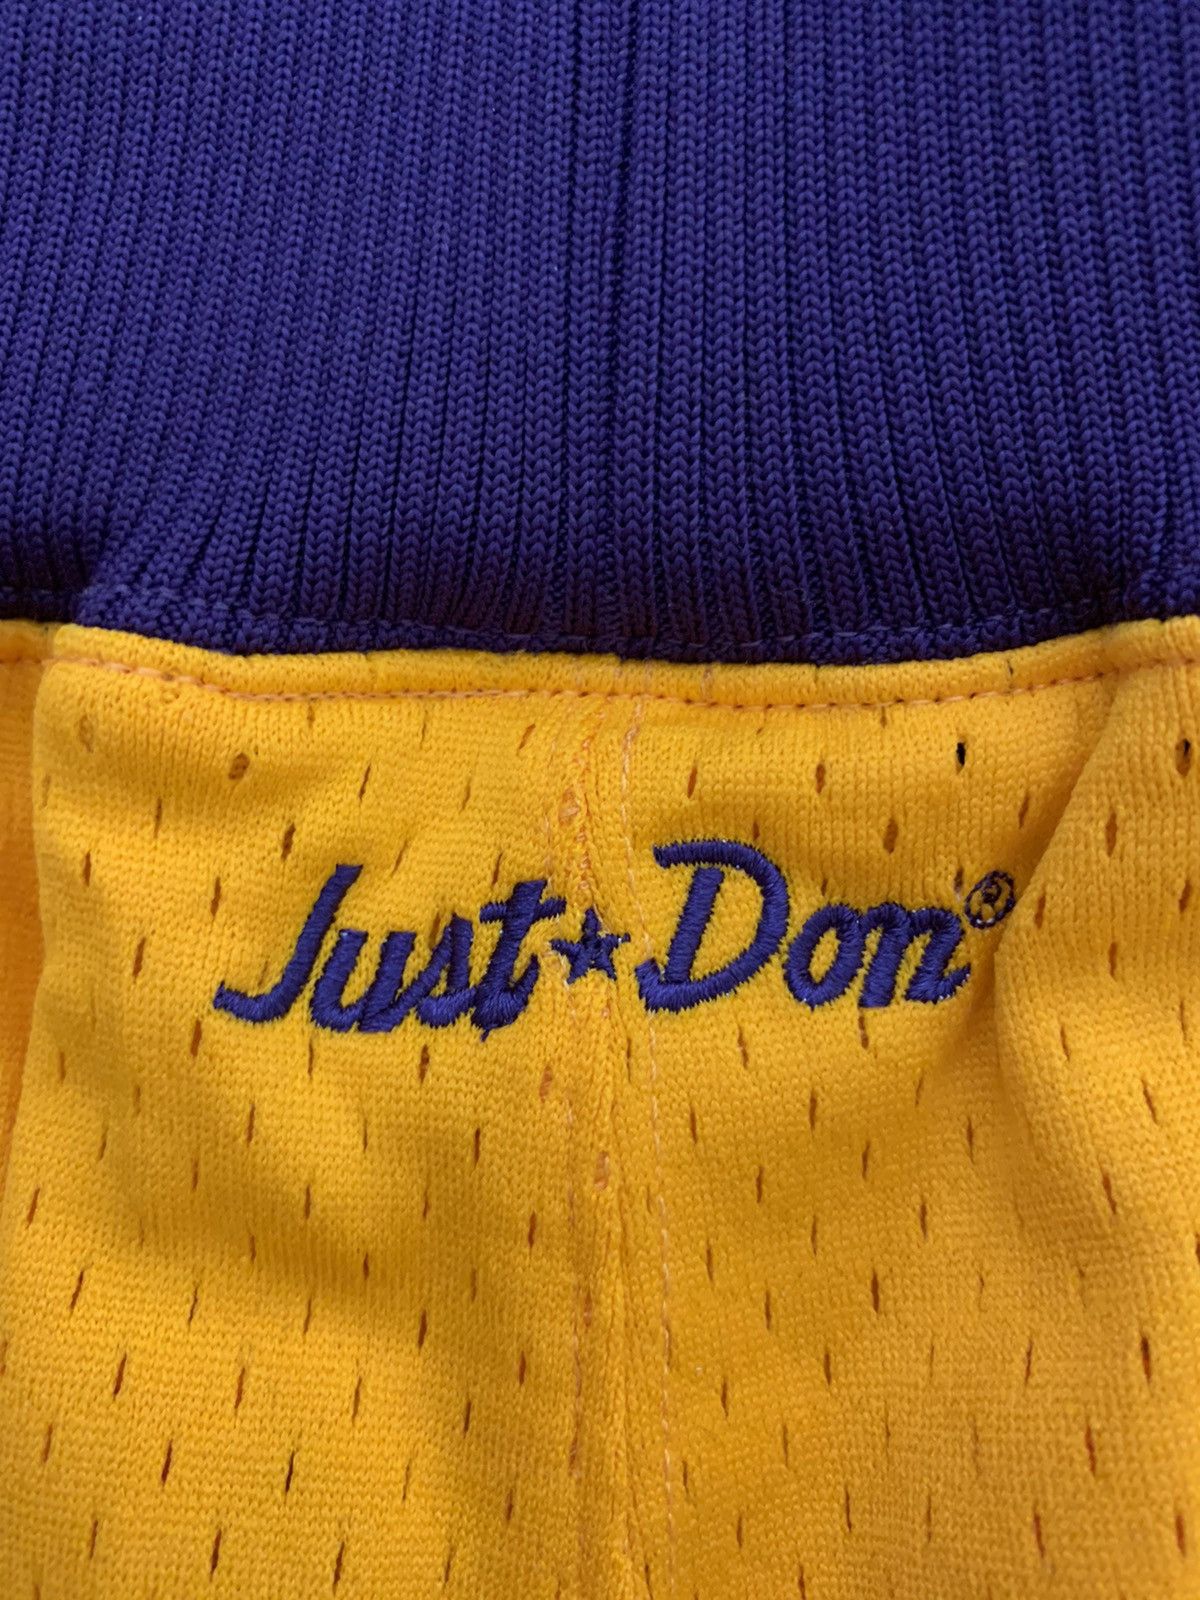 Mitchell & Ness JUST DON LOS ANGELES LAKERS 1996-97 HOME SHORTS Size US 34 / EU 50 - 3 Thumbnail